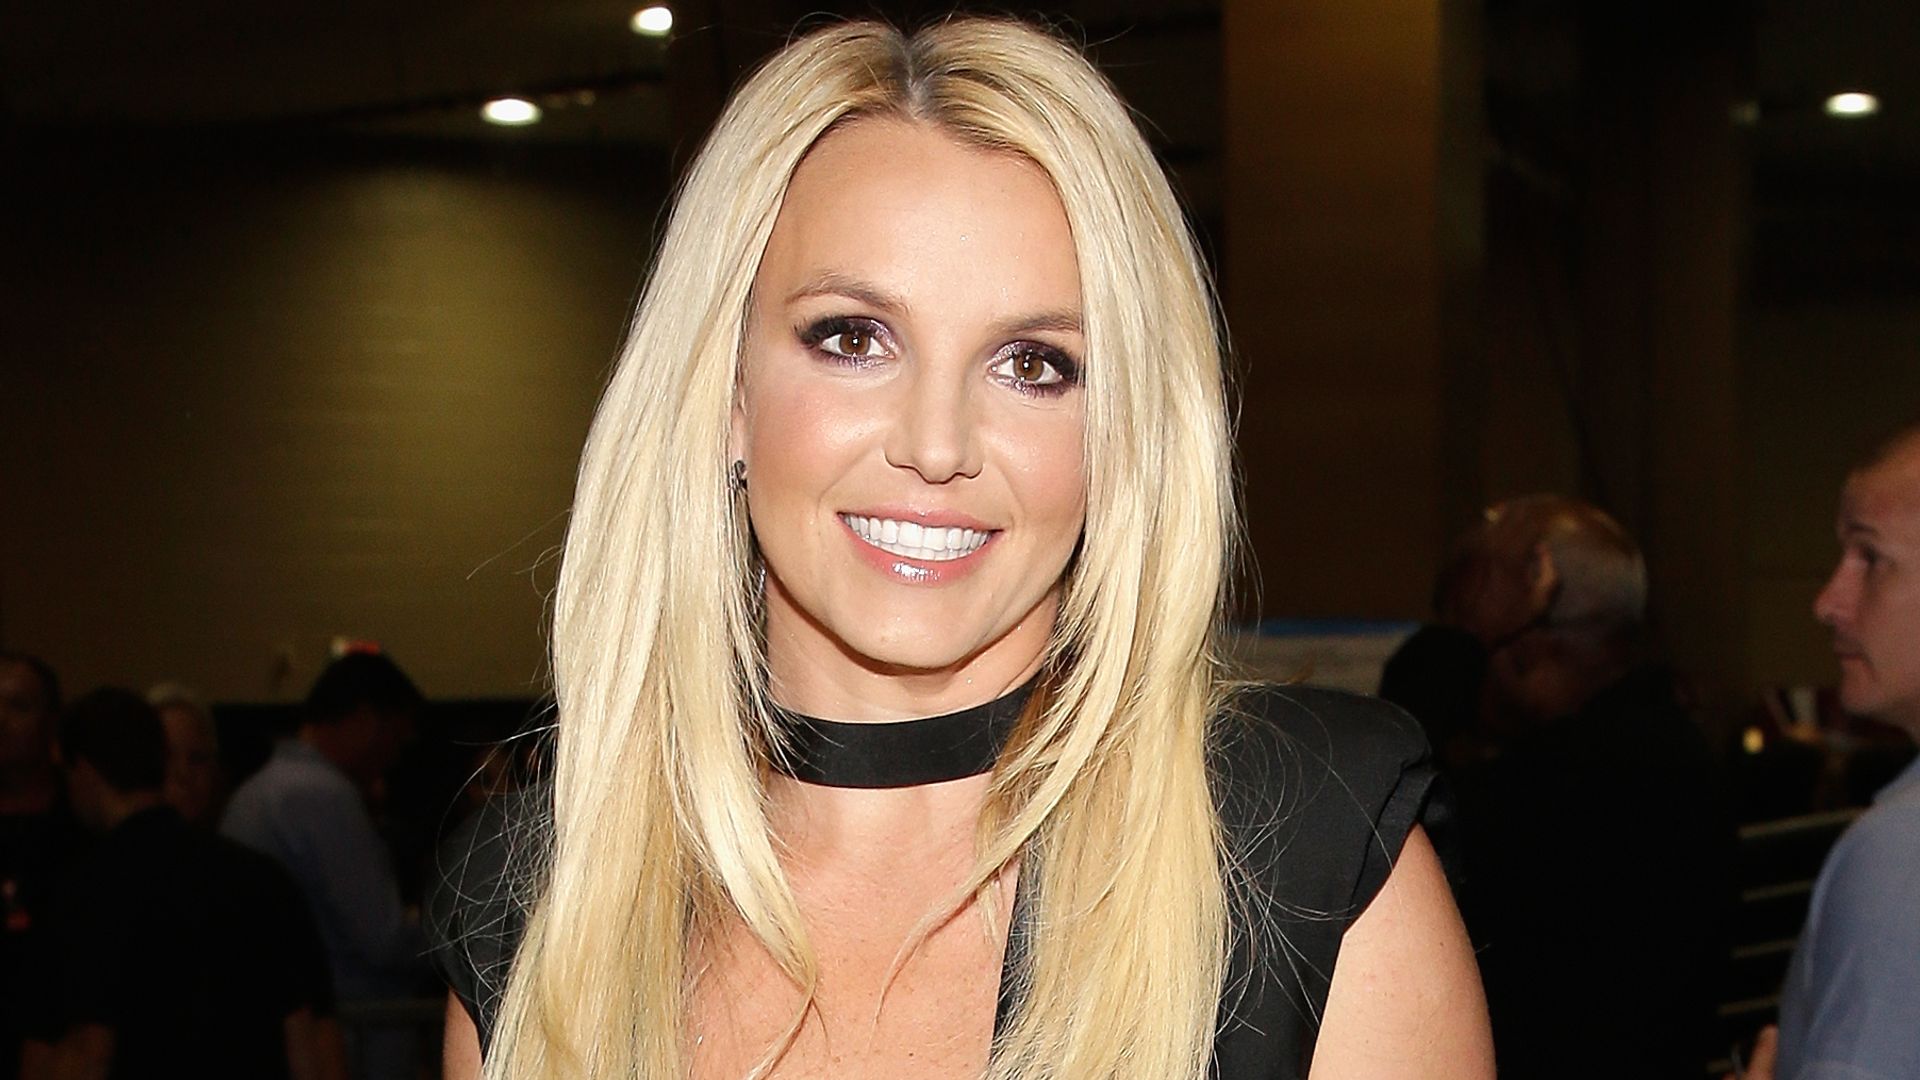 Entertainer Britney Spears attends the iHeartRadio Music Festival at the MGM Grand Garden Arena on September 21, 2013 